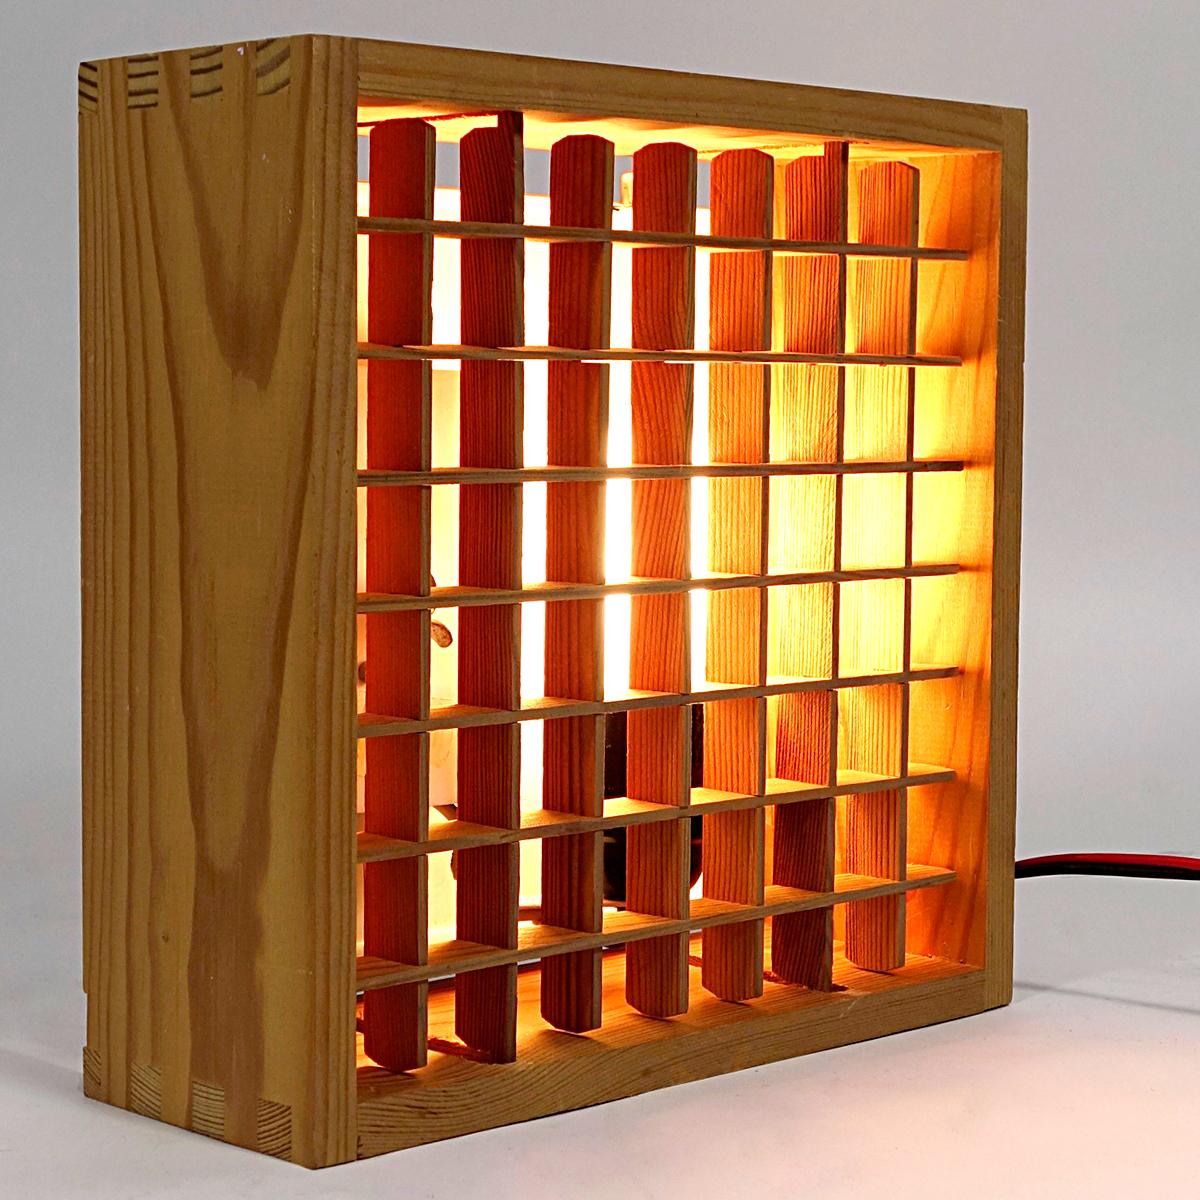 Rare ceiling light made of wood with a steel base that is attached to the ceiling. The joints in the wood construction well visible. It has a wooden grid containing 64 squares allowing for a subtle direction of the light coming out.